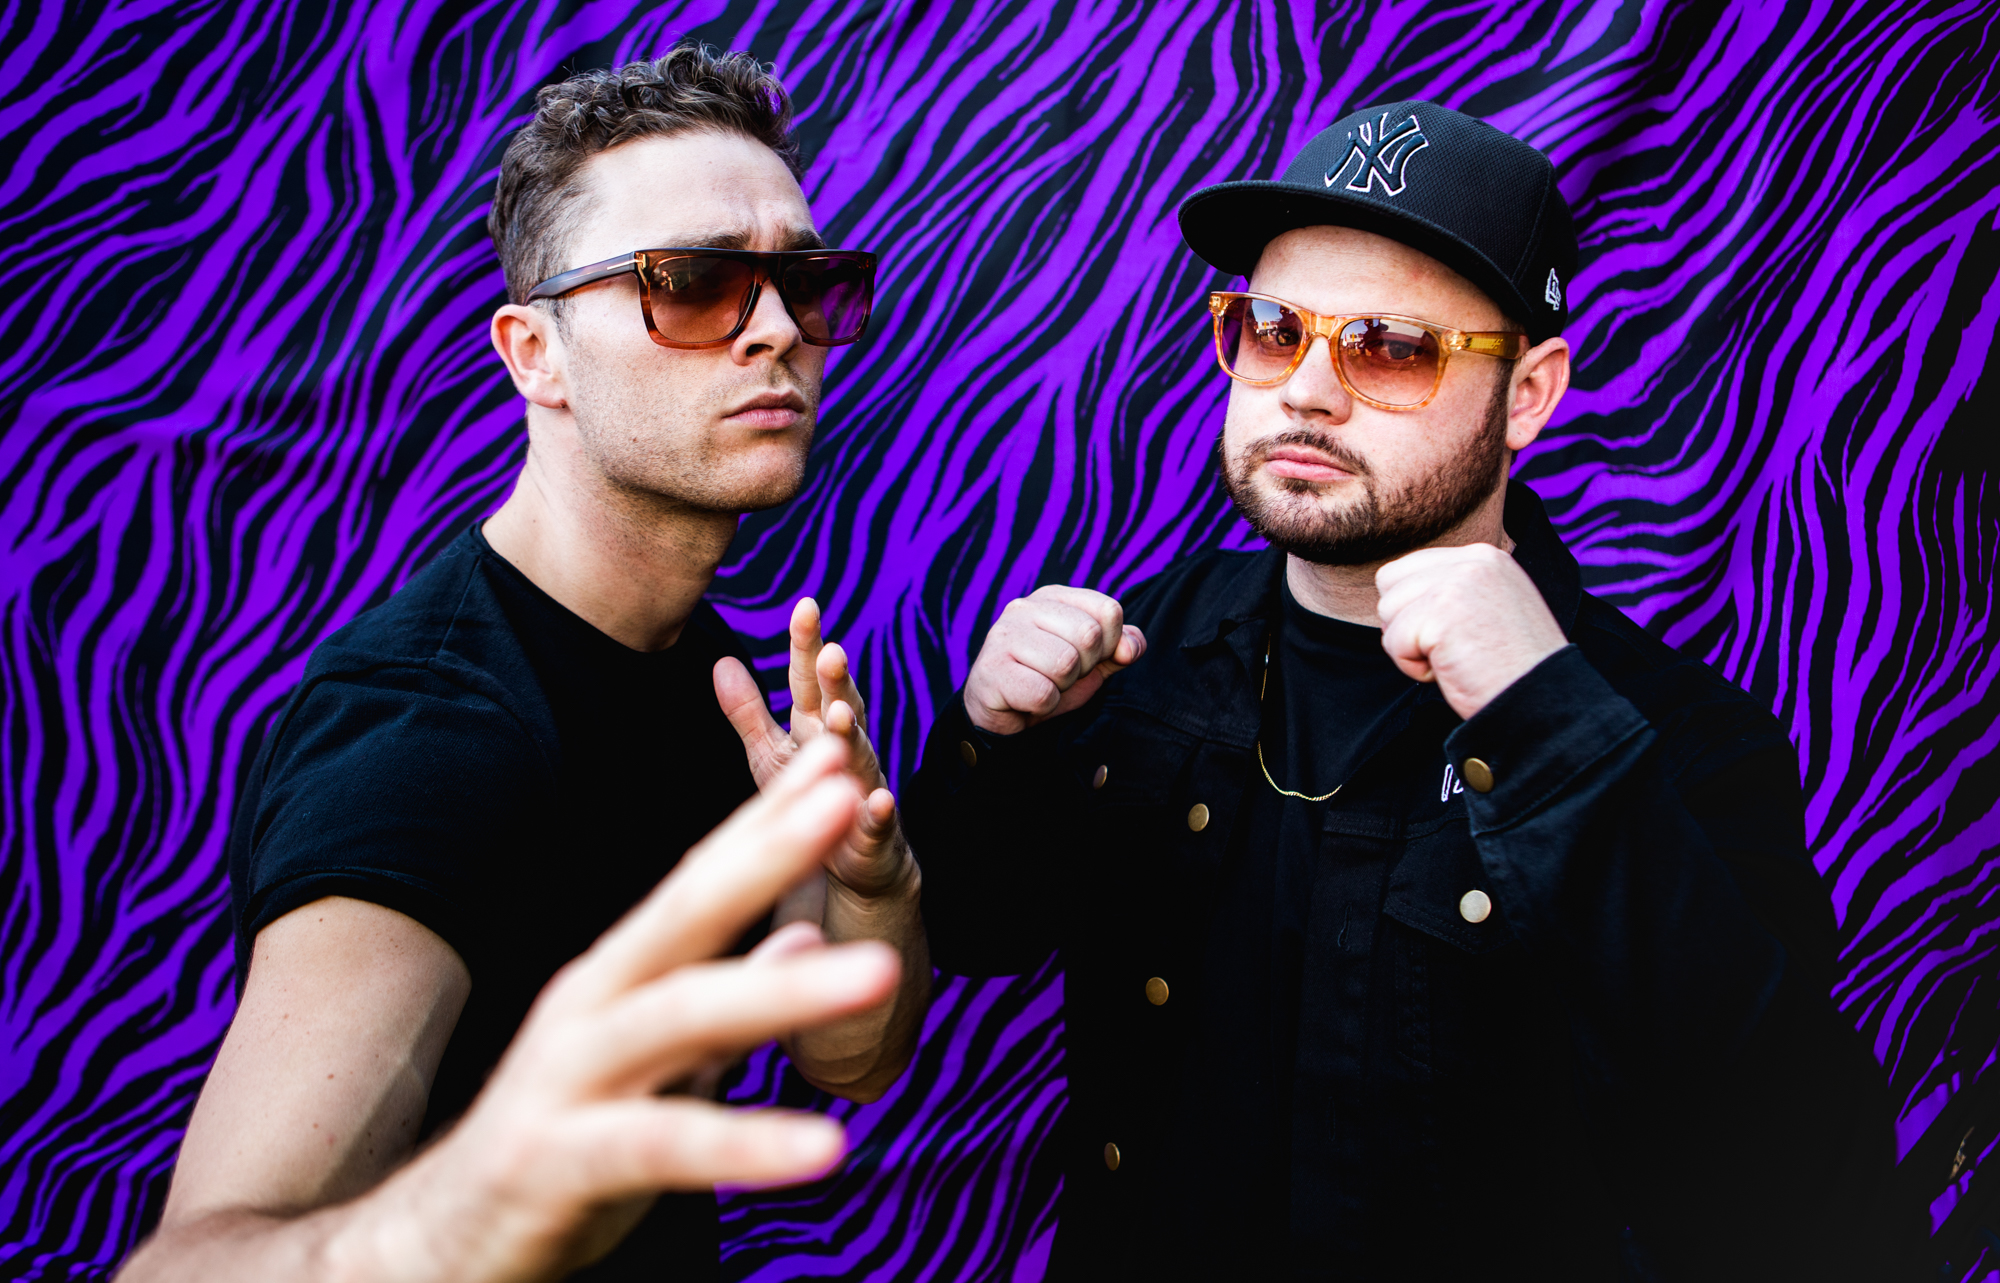 HD desktop wallpaper featuring two stylish band members in front of a vibrant purple patterned background, tagged Royal Blood.